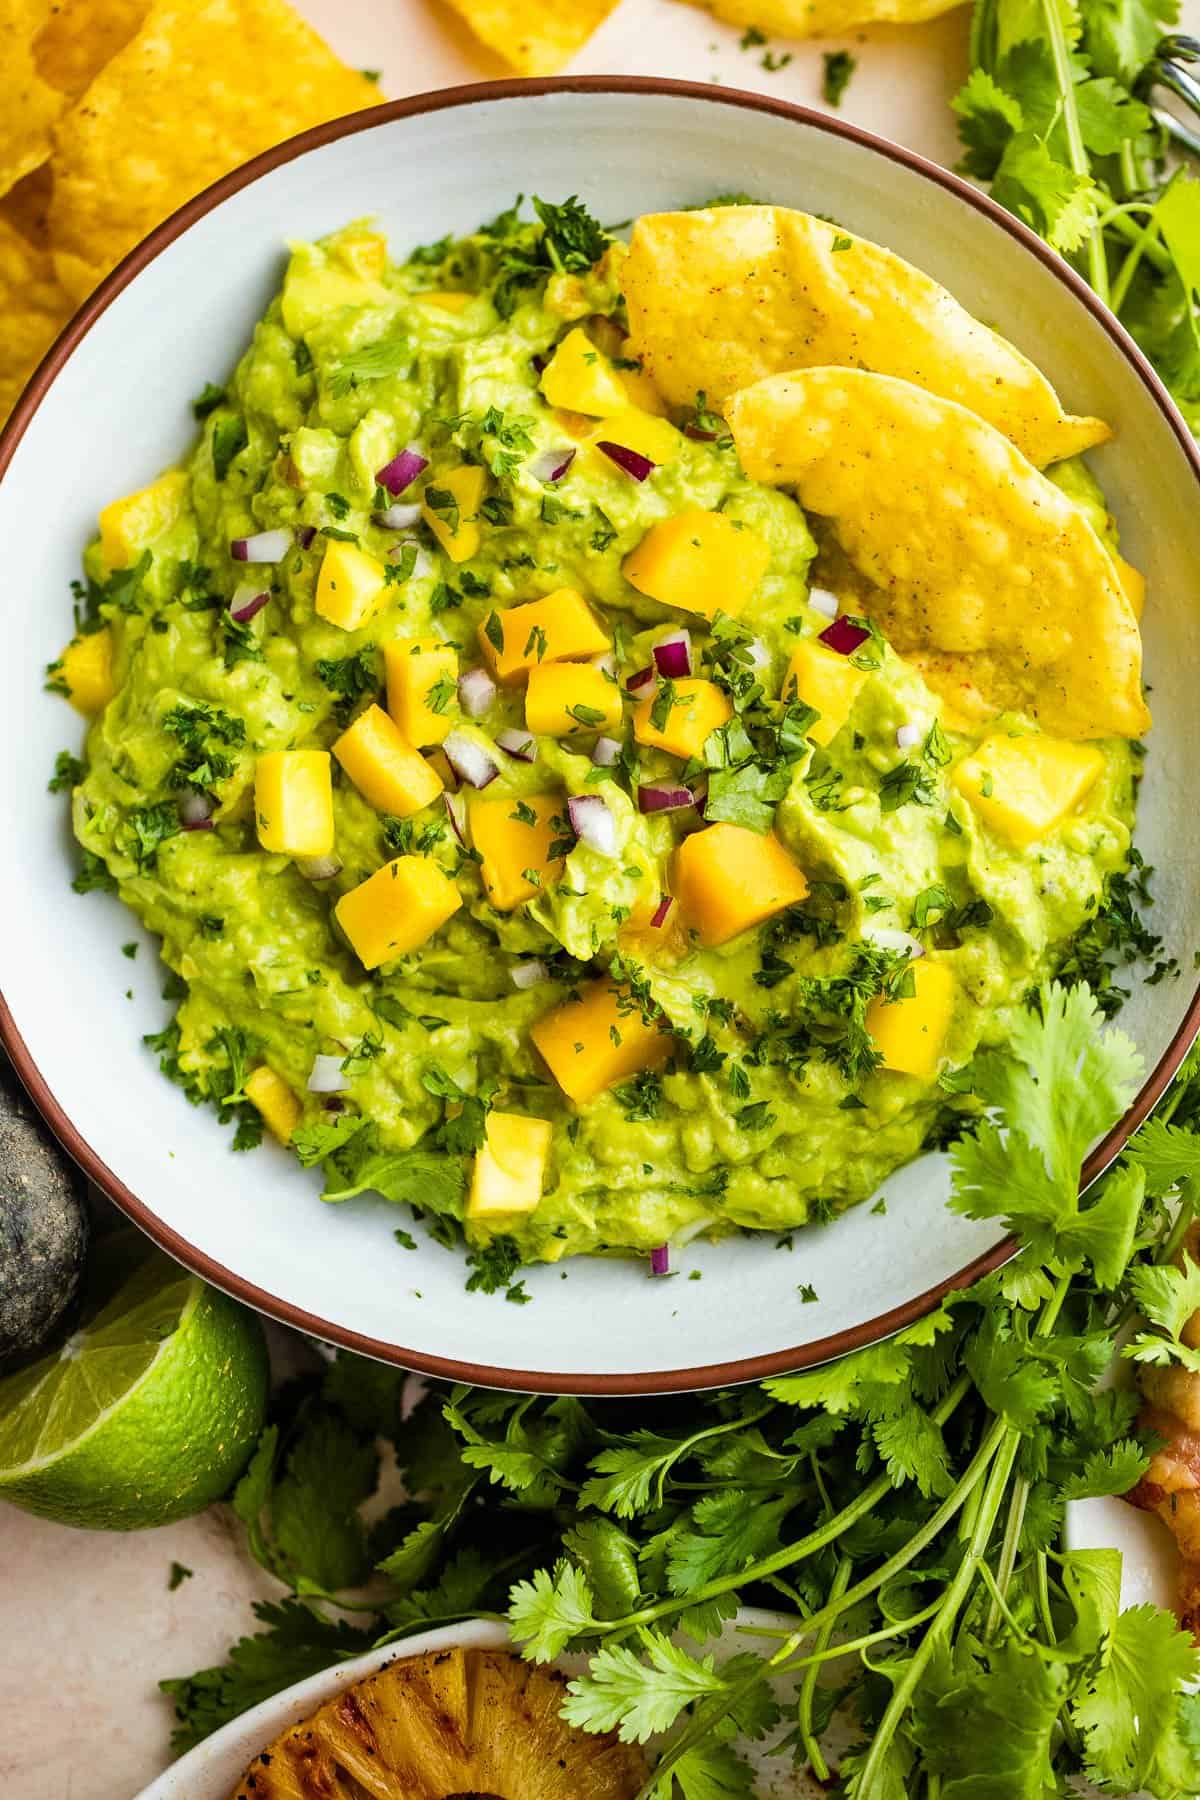 gray bowl filled with guacamole and mangoes with tortilla chips and barbecued meat served around it